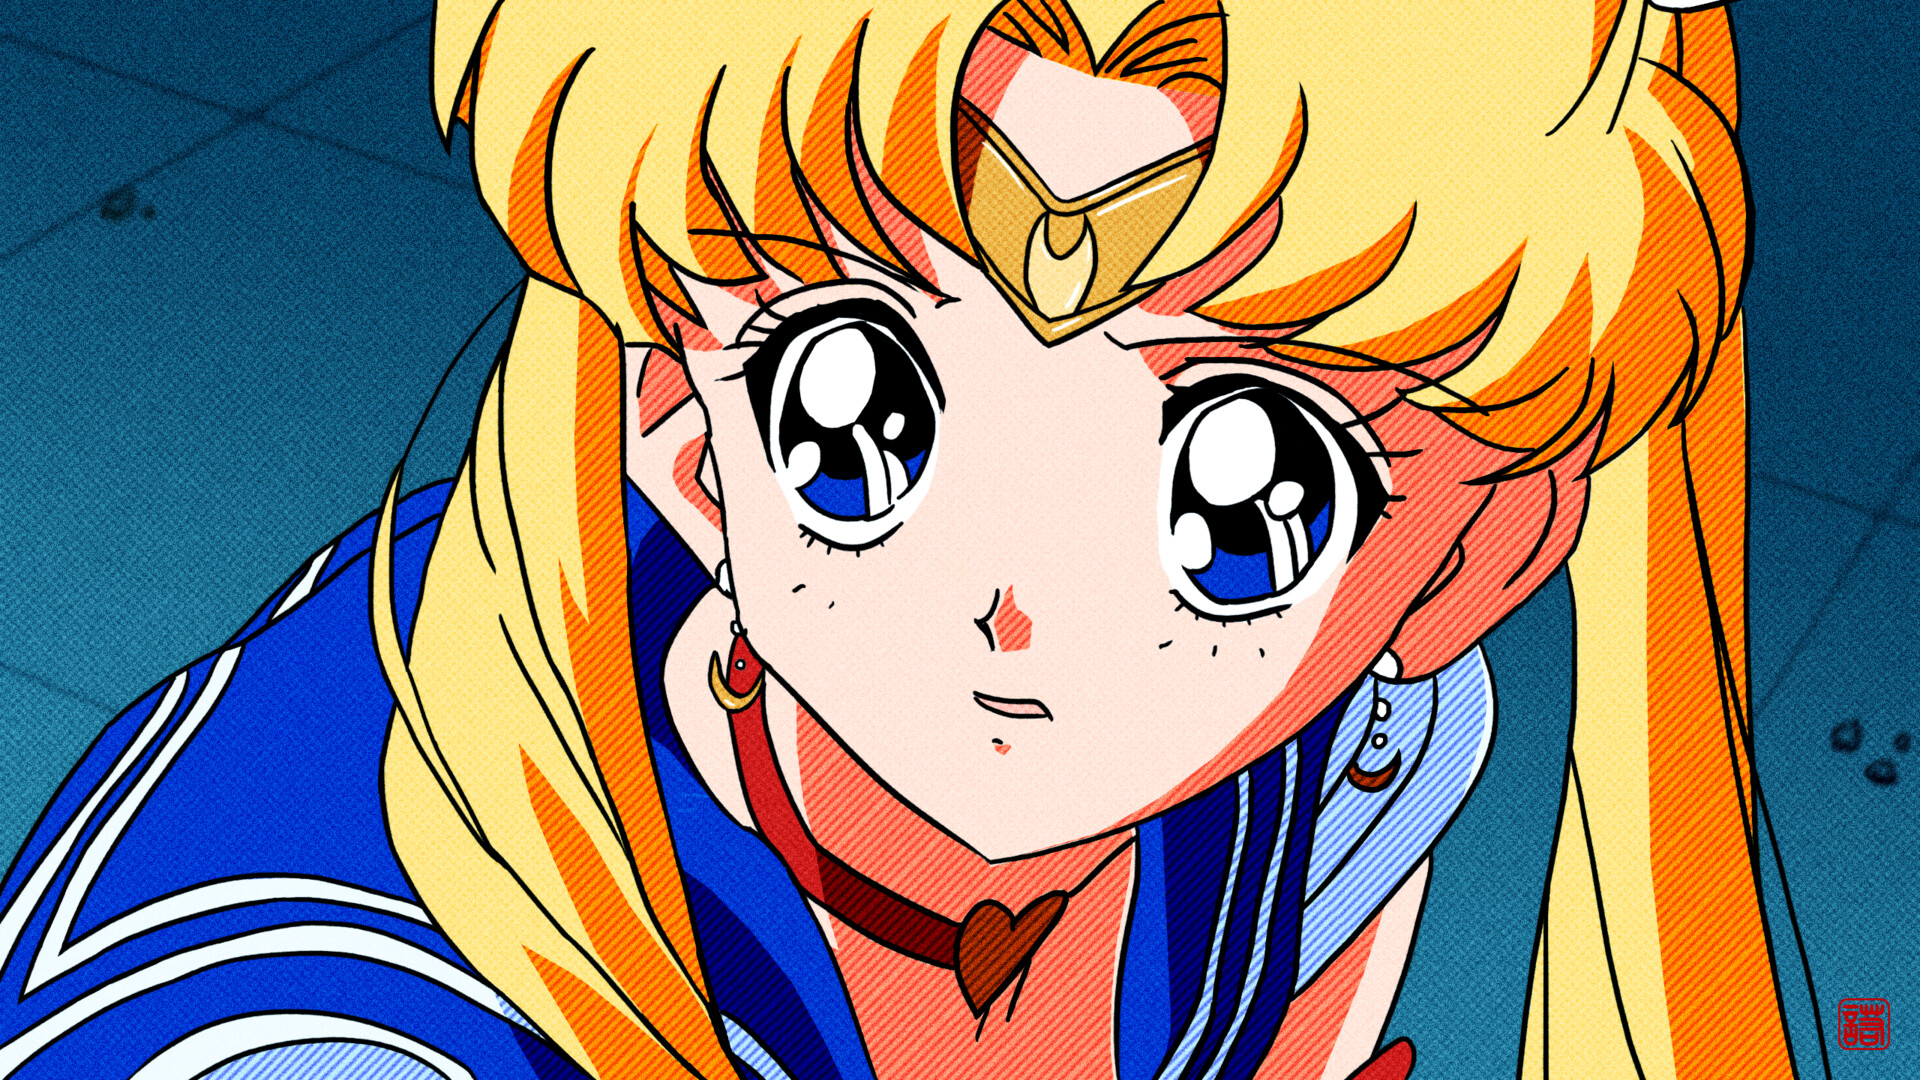 Redrawn Sailor Moon with additional effects.